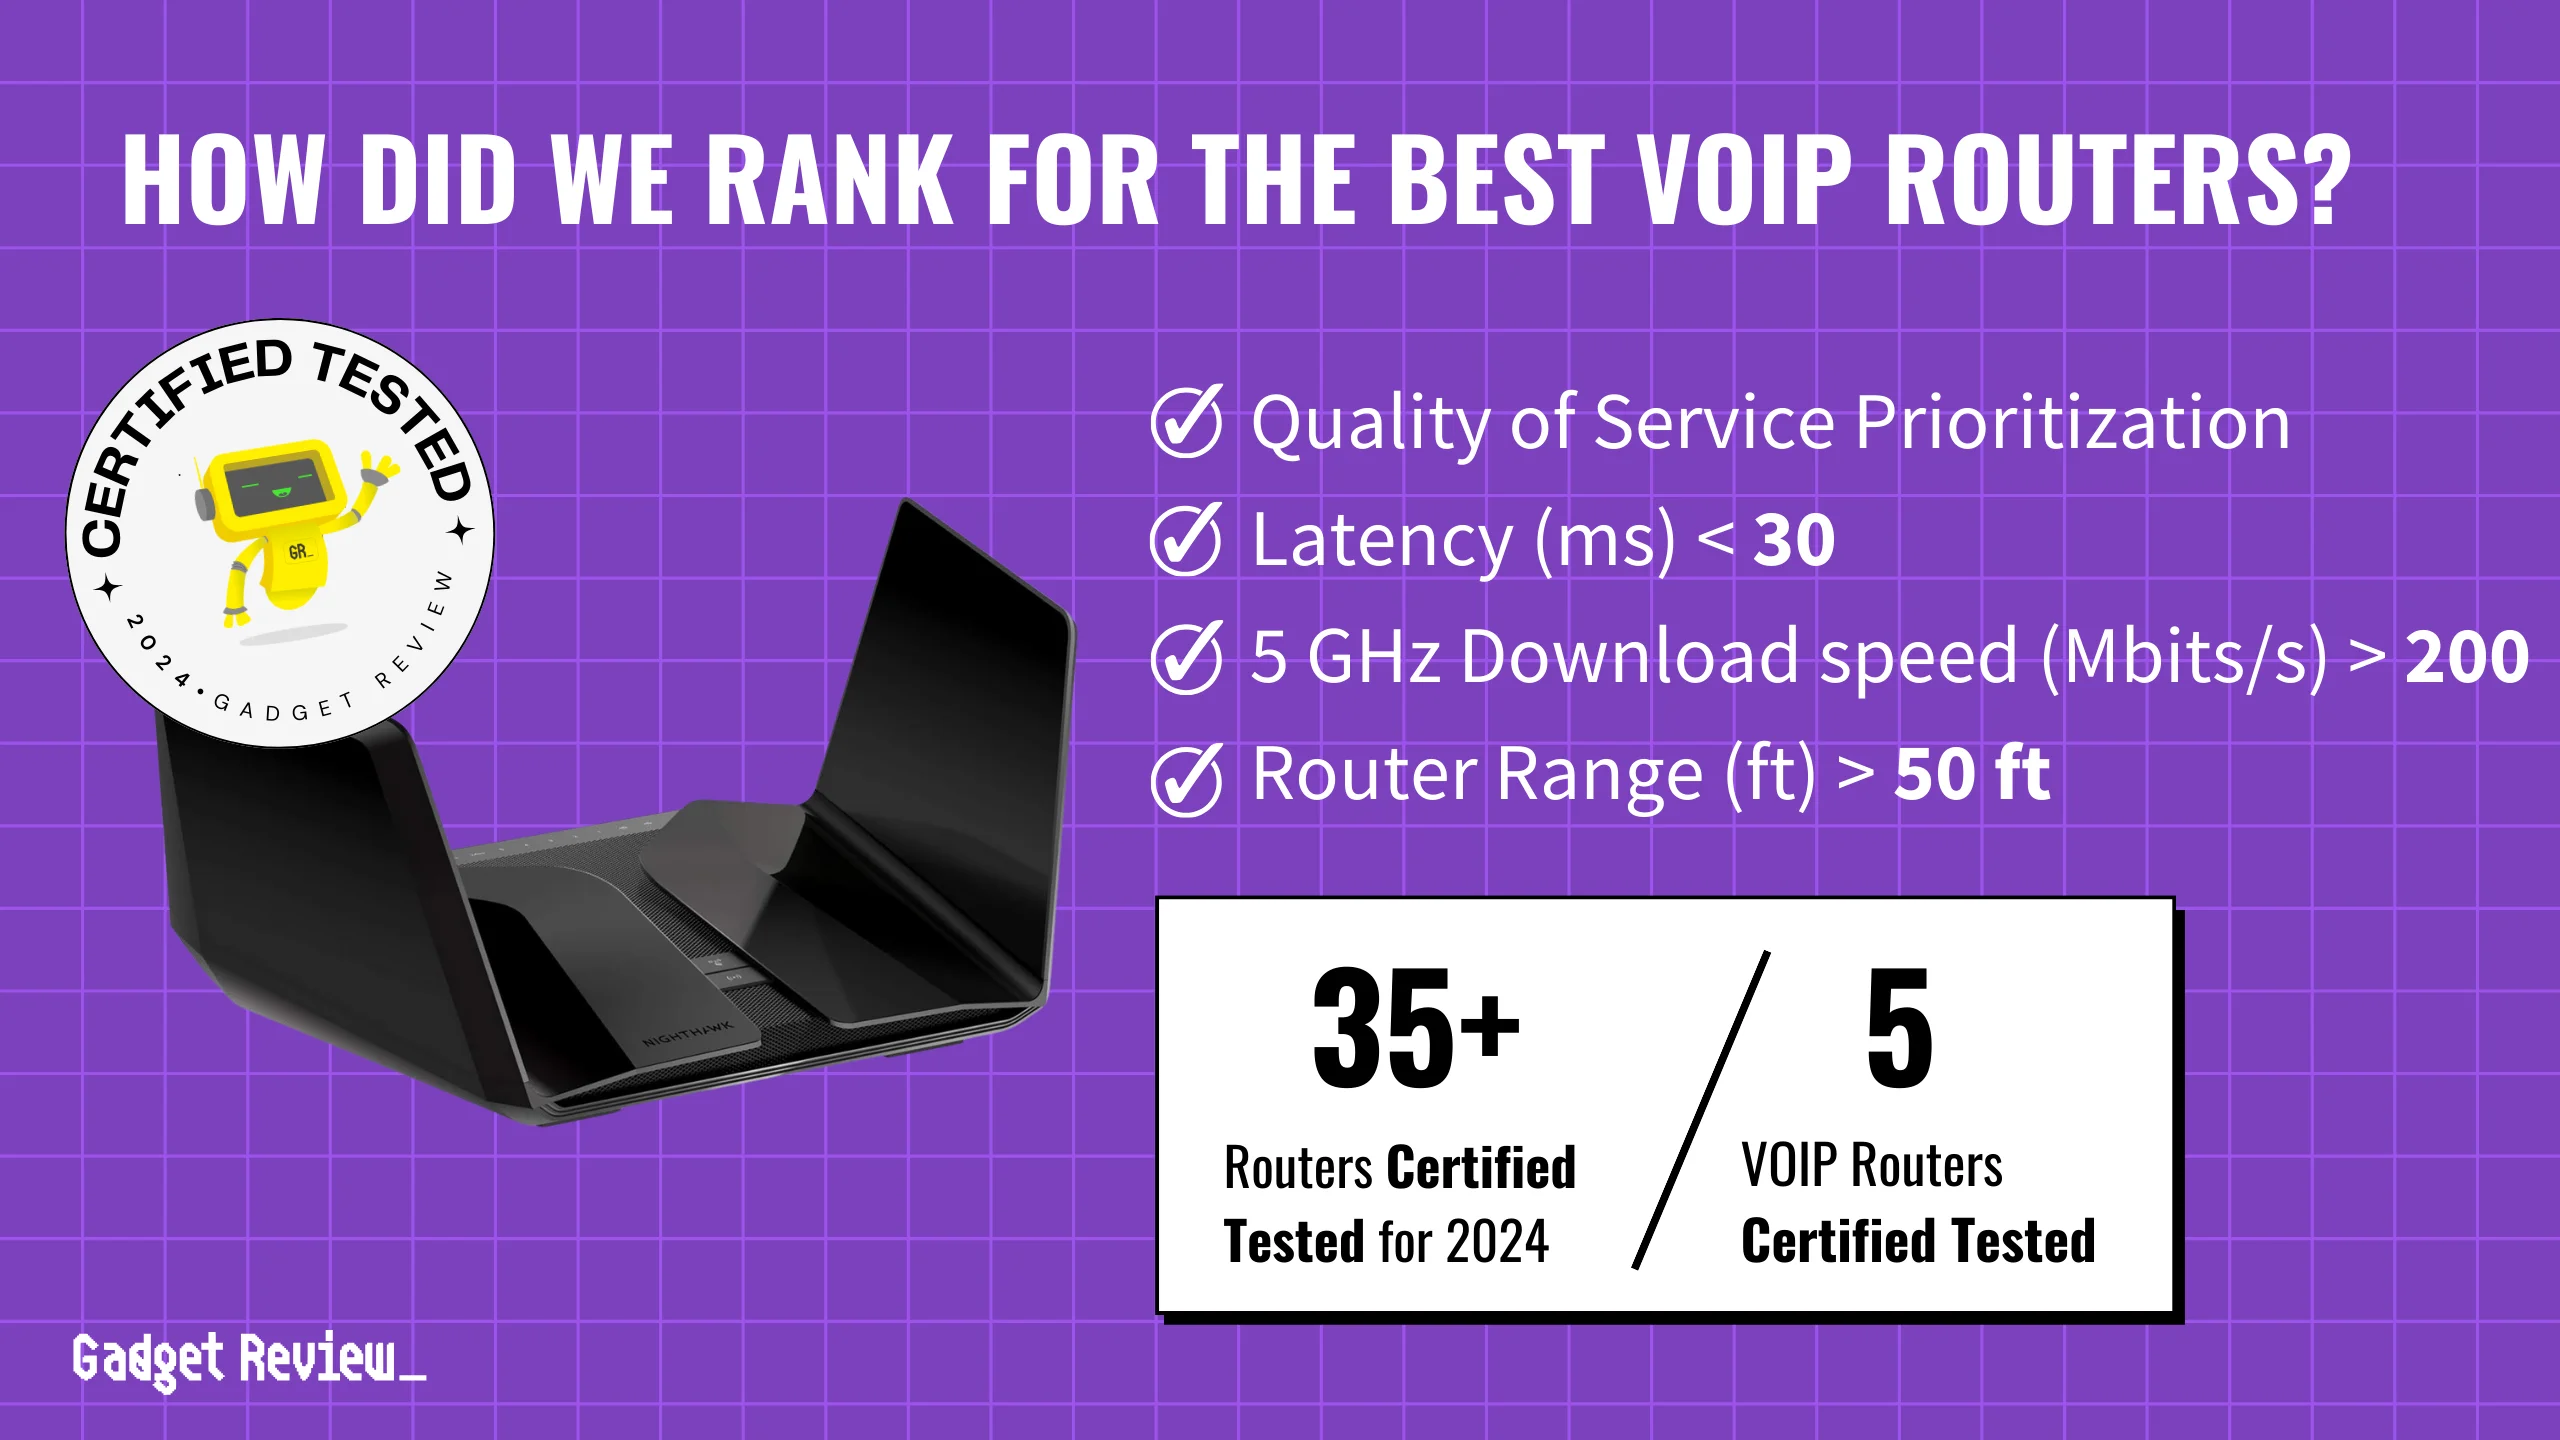 How We Ranked the 5 Best VOIP Routers